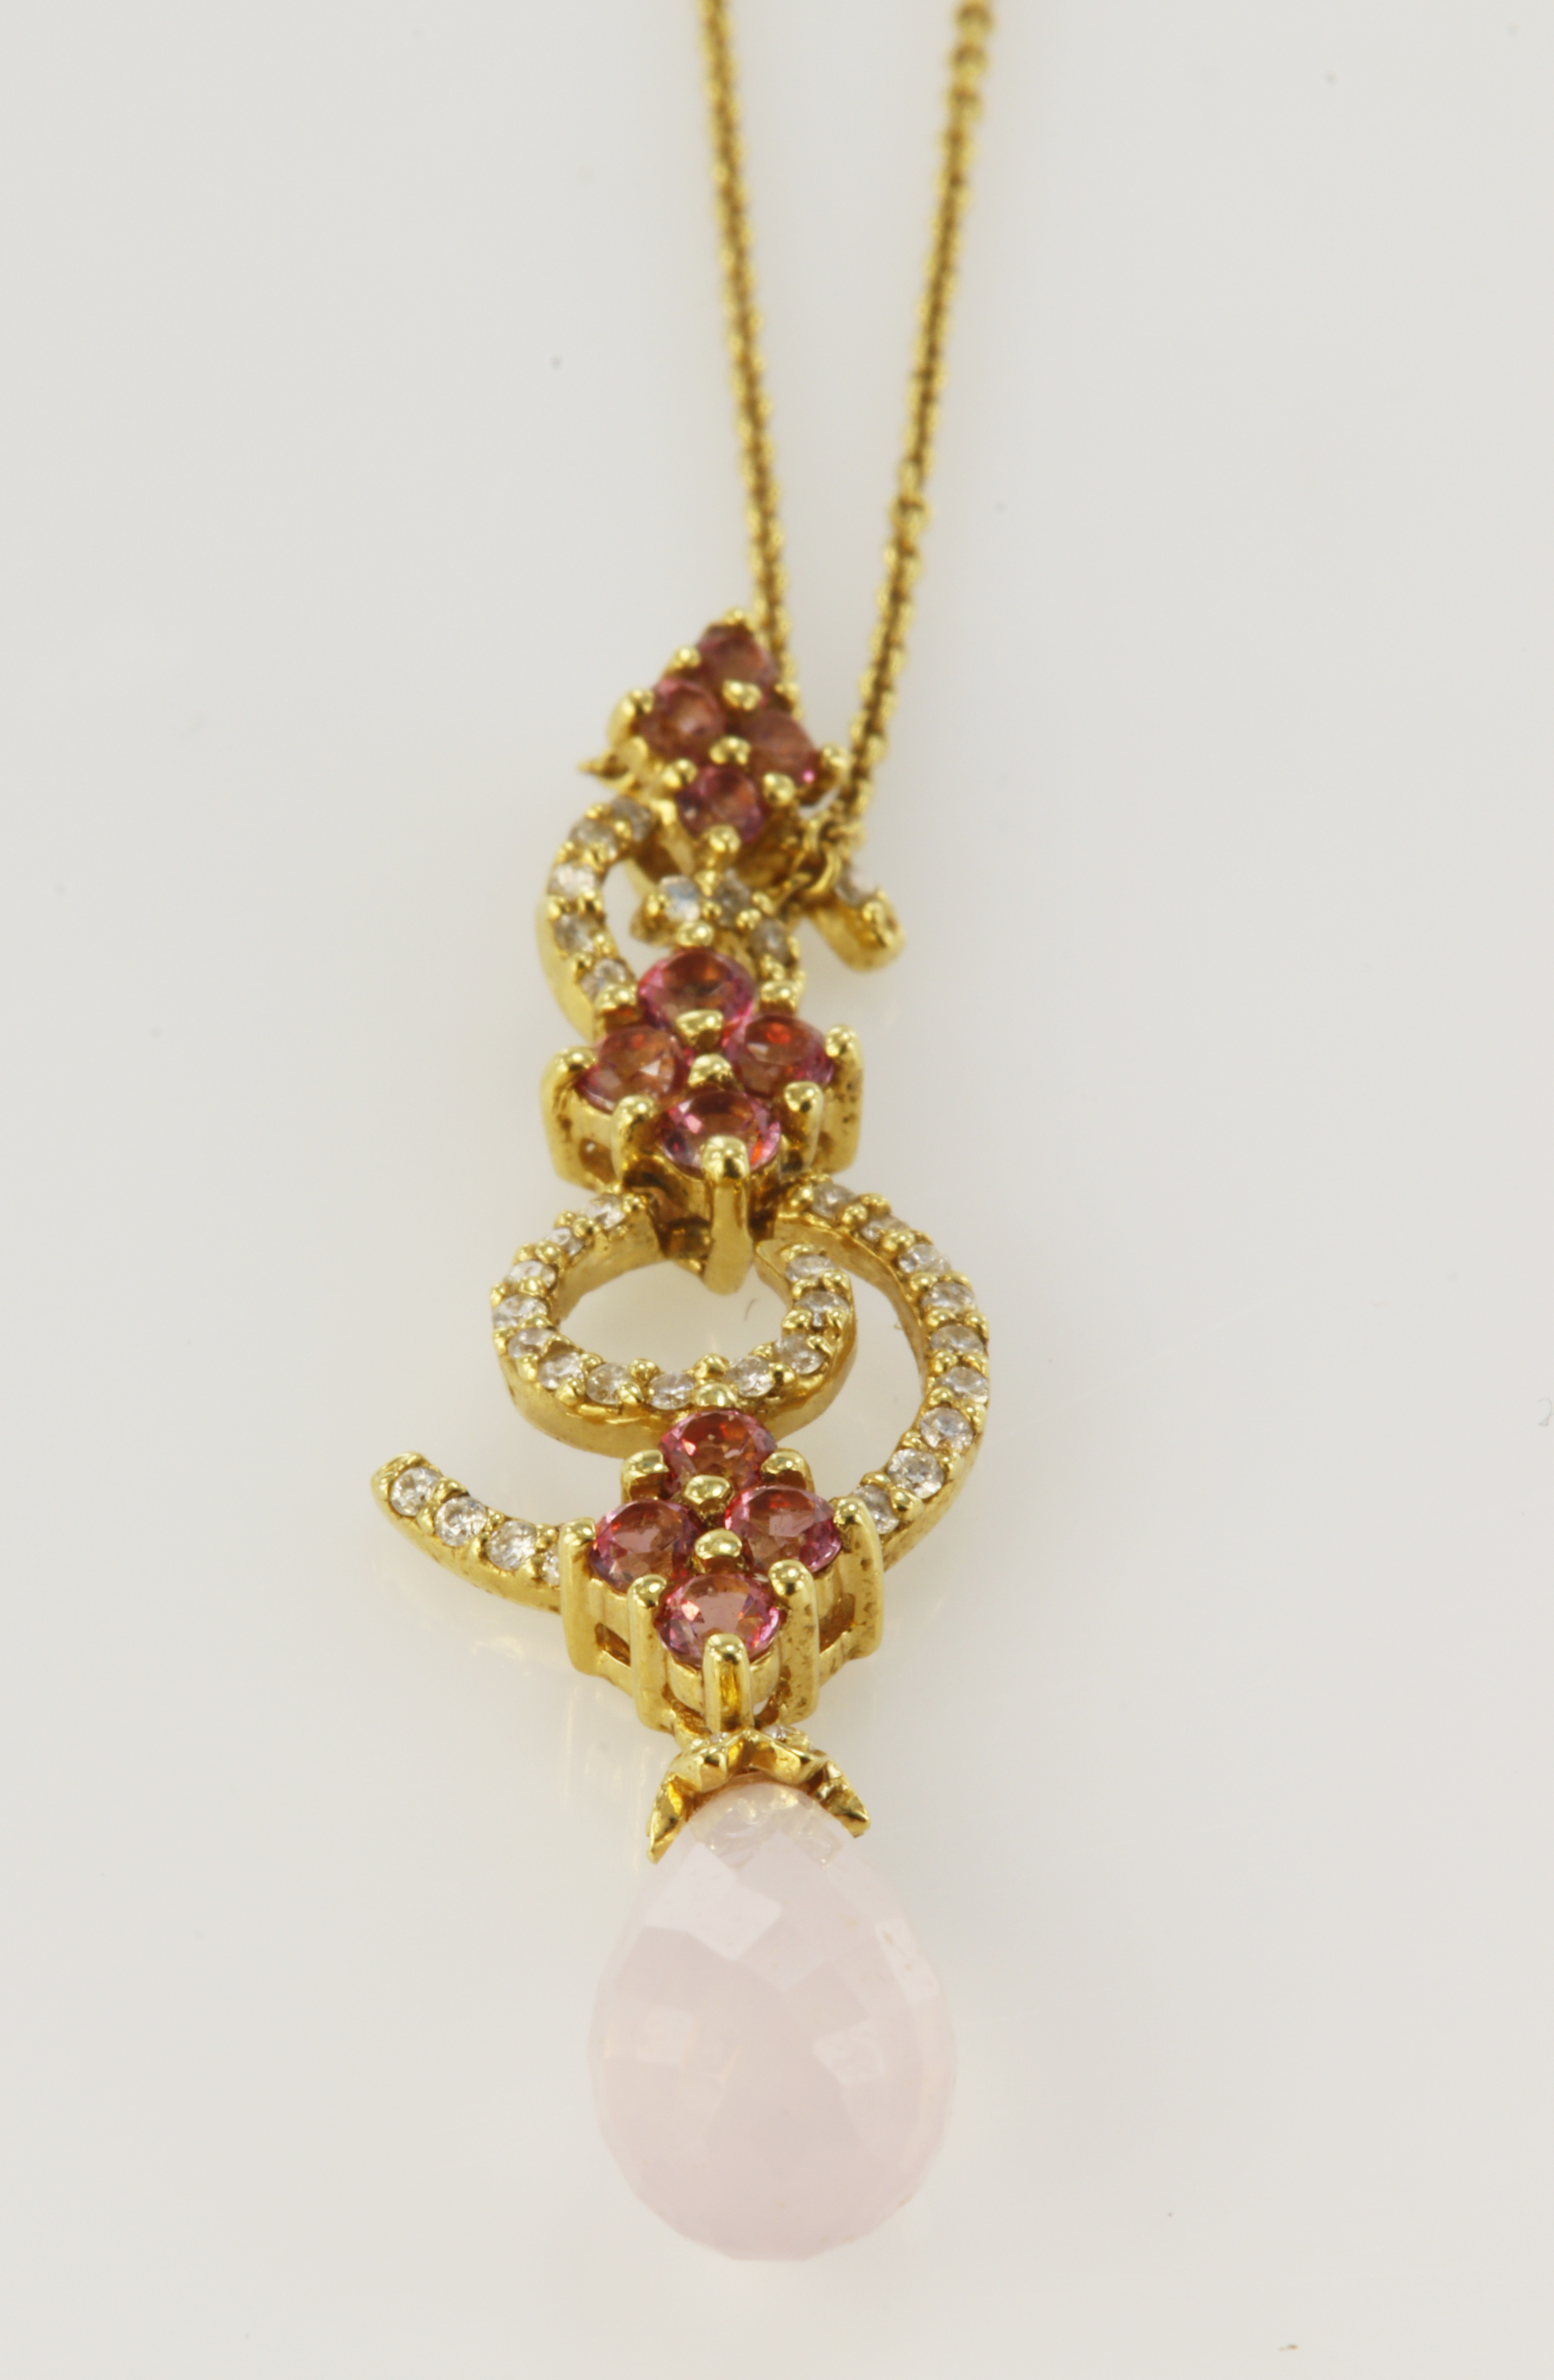 Lovely 18ct yellow gold pendant with two diamond set spirals, featuring pink topaz and a rose quartz